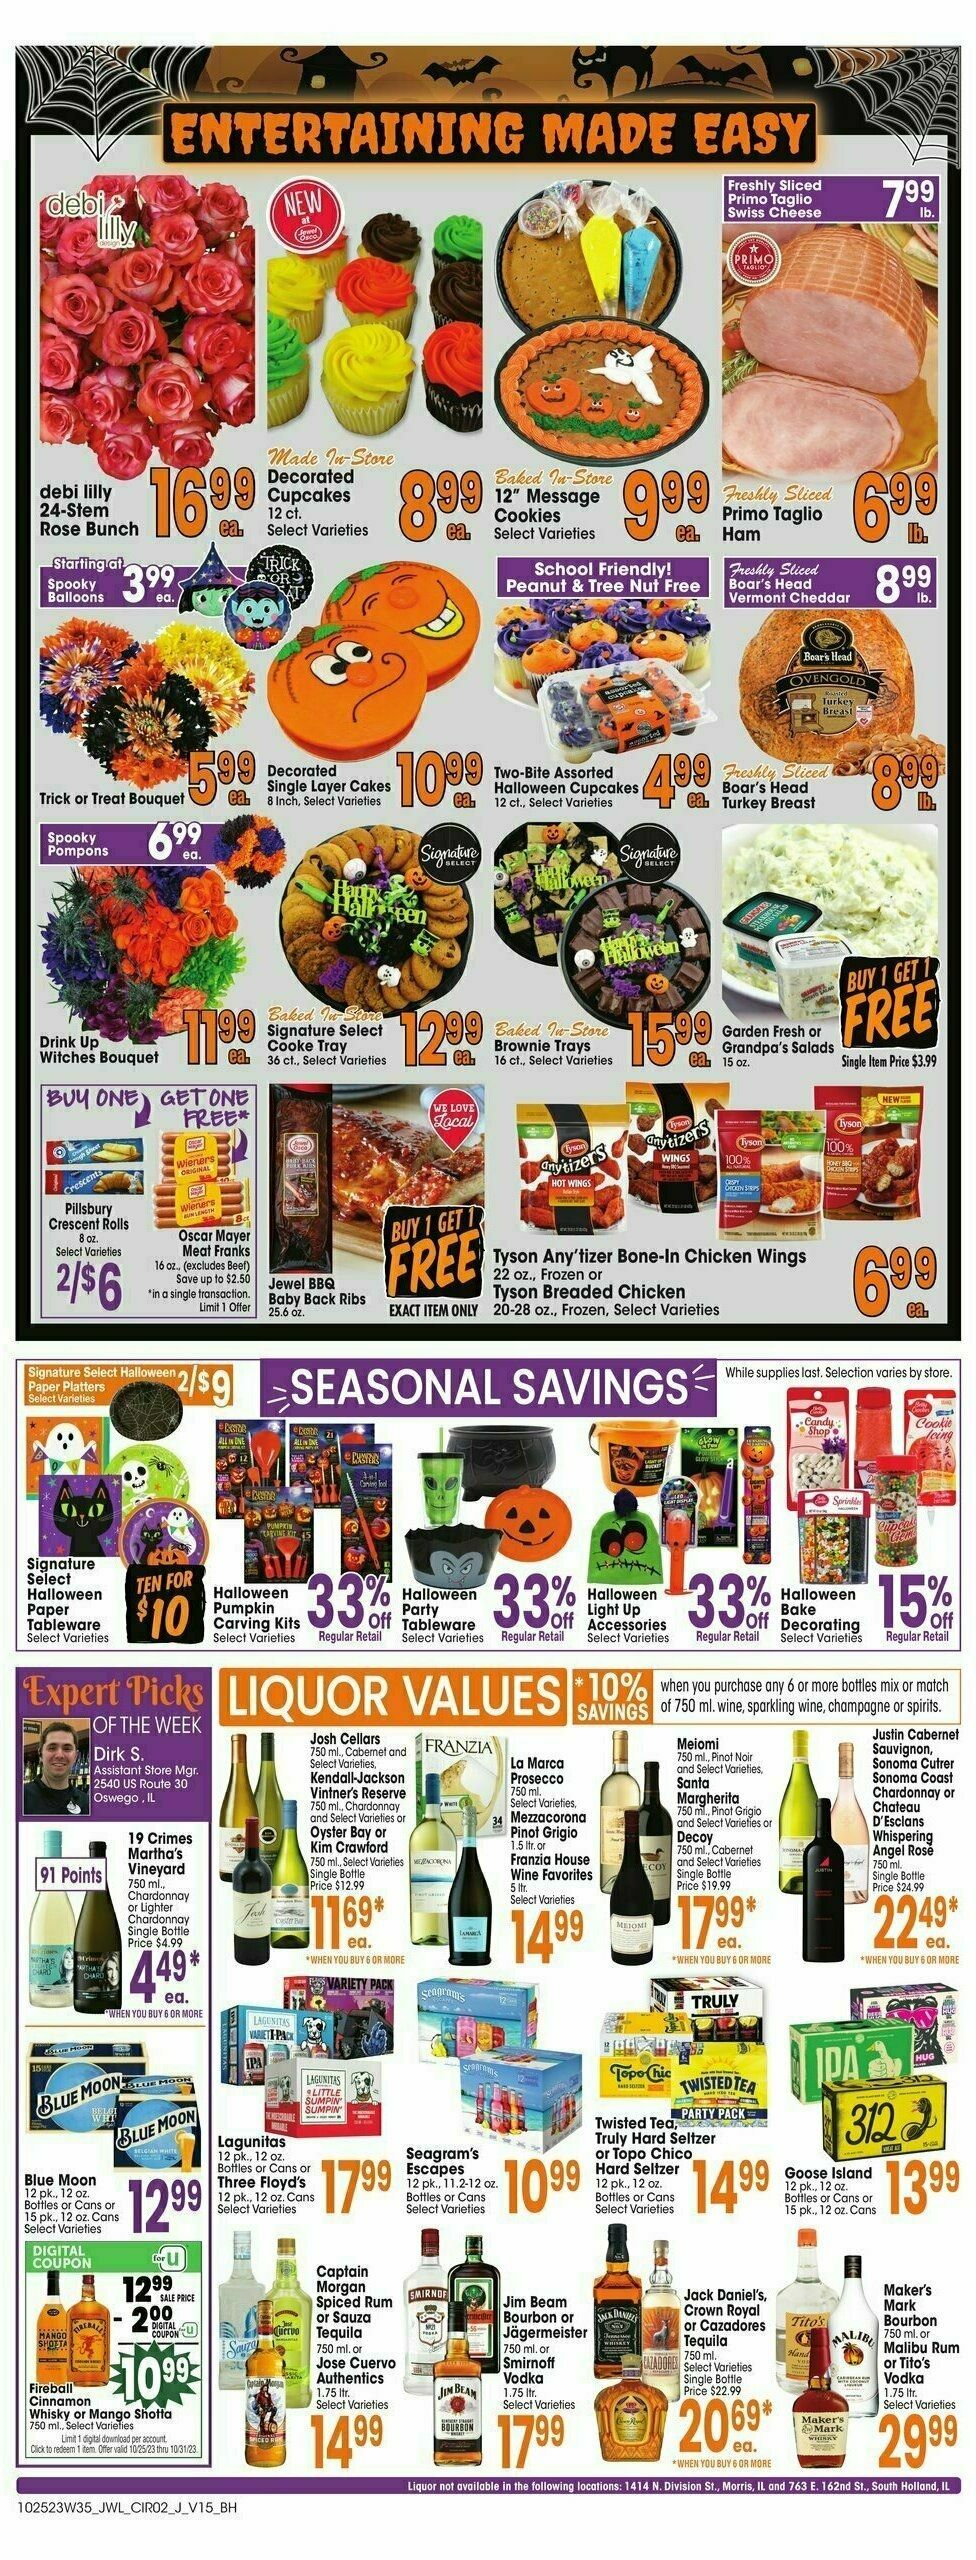 Jewel Osco Weekly Ad from October 25